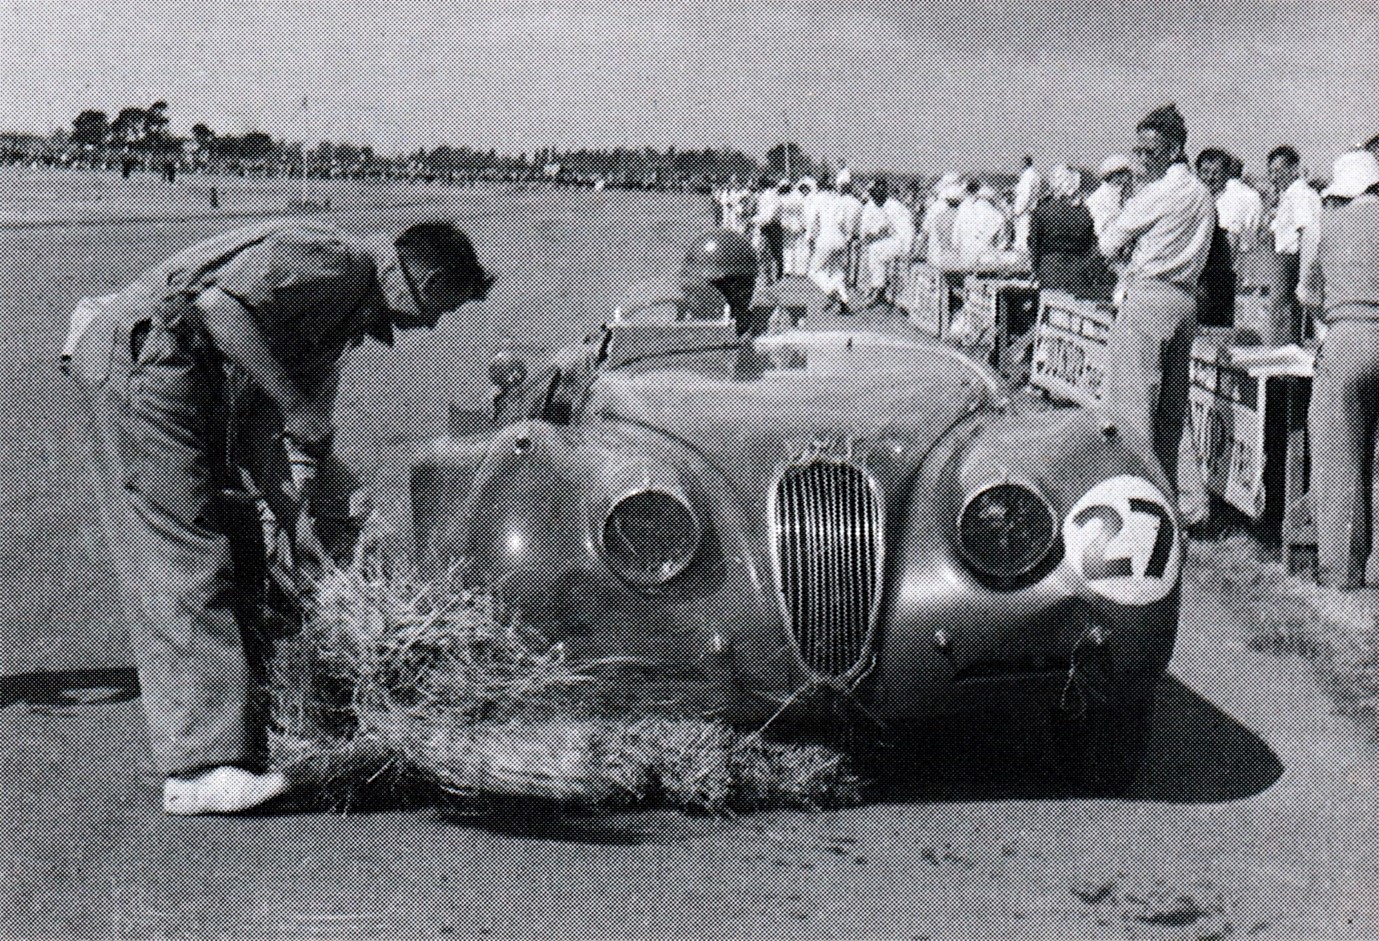 Wigram 6 Feb 54 - Ray Archibald #27 Jaguar XK120 suffered a blown tyre in the Lady Wigram Trophy race, which put him into the hay bales. Here he is in the Pits having the hay removed and the wheel changed – Photo MRC Collection in book Wigram Motor Racing 1949-94